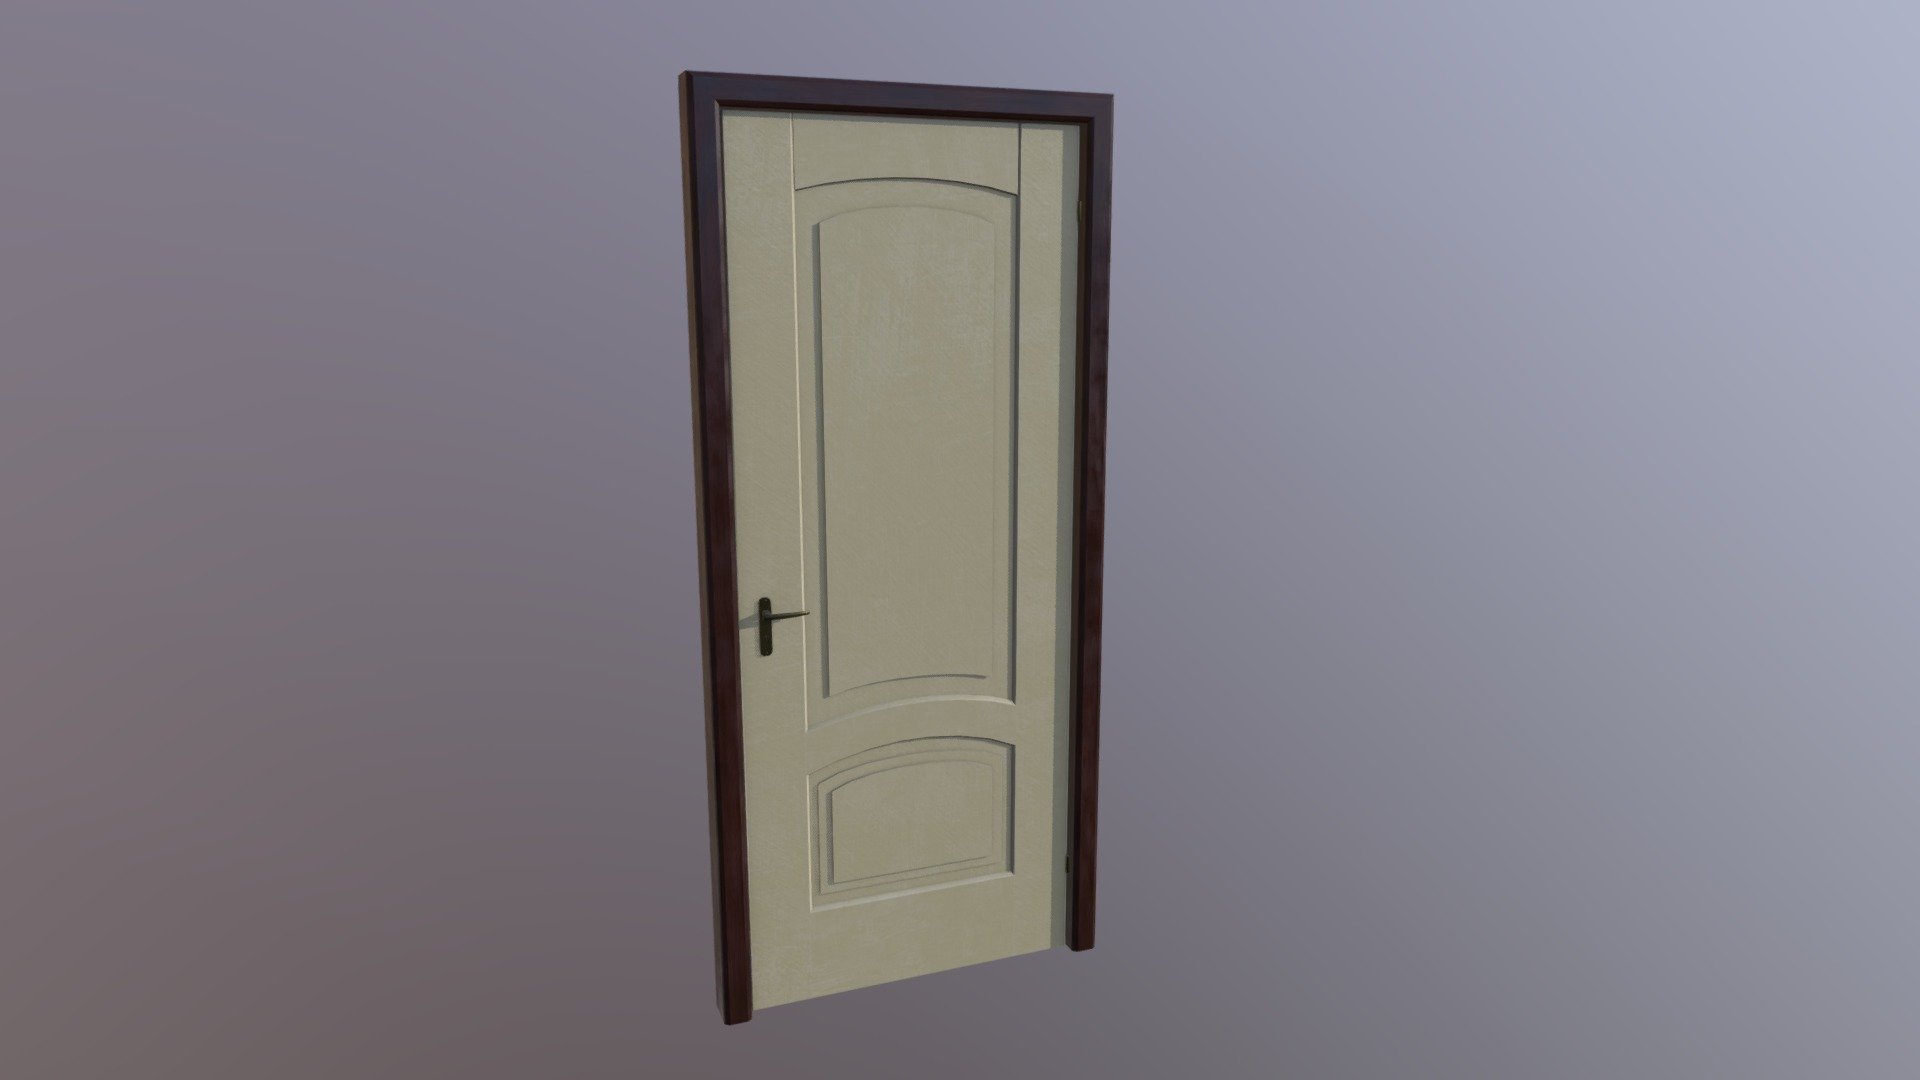 5 material- Included are textures for Vray, Unreal Engine 4 and Unity. Fbx file.
Textures resolution 2048 x 2048.
 - Door - 3D model by Big Stake Games (@bigstakegames) 3d model